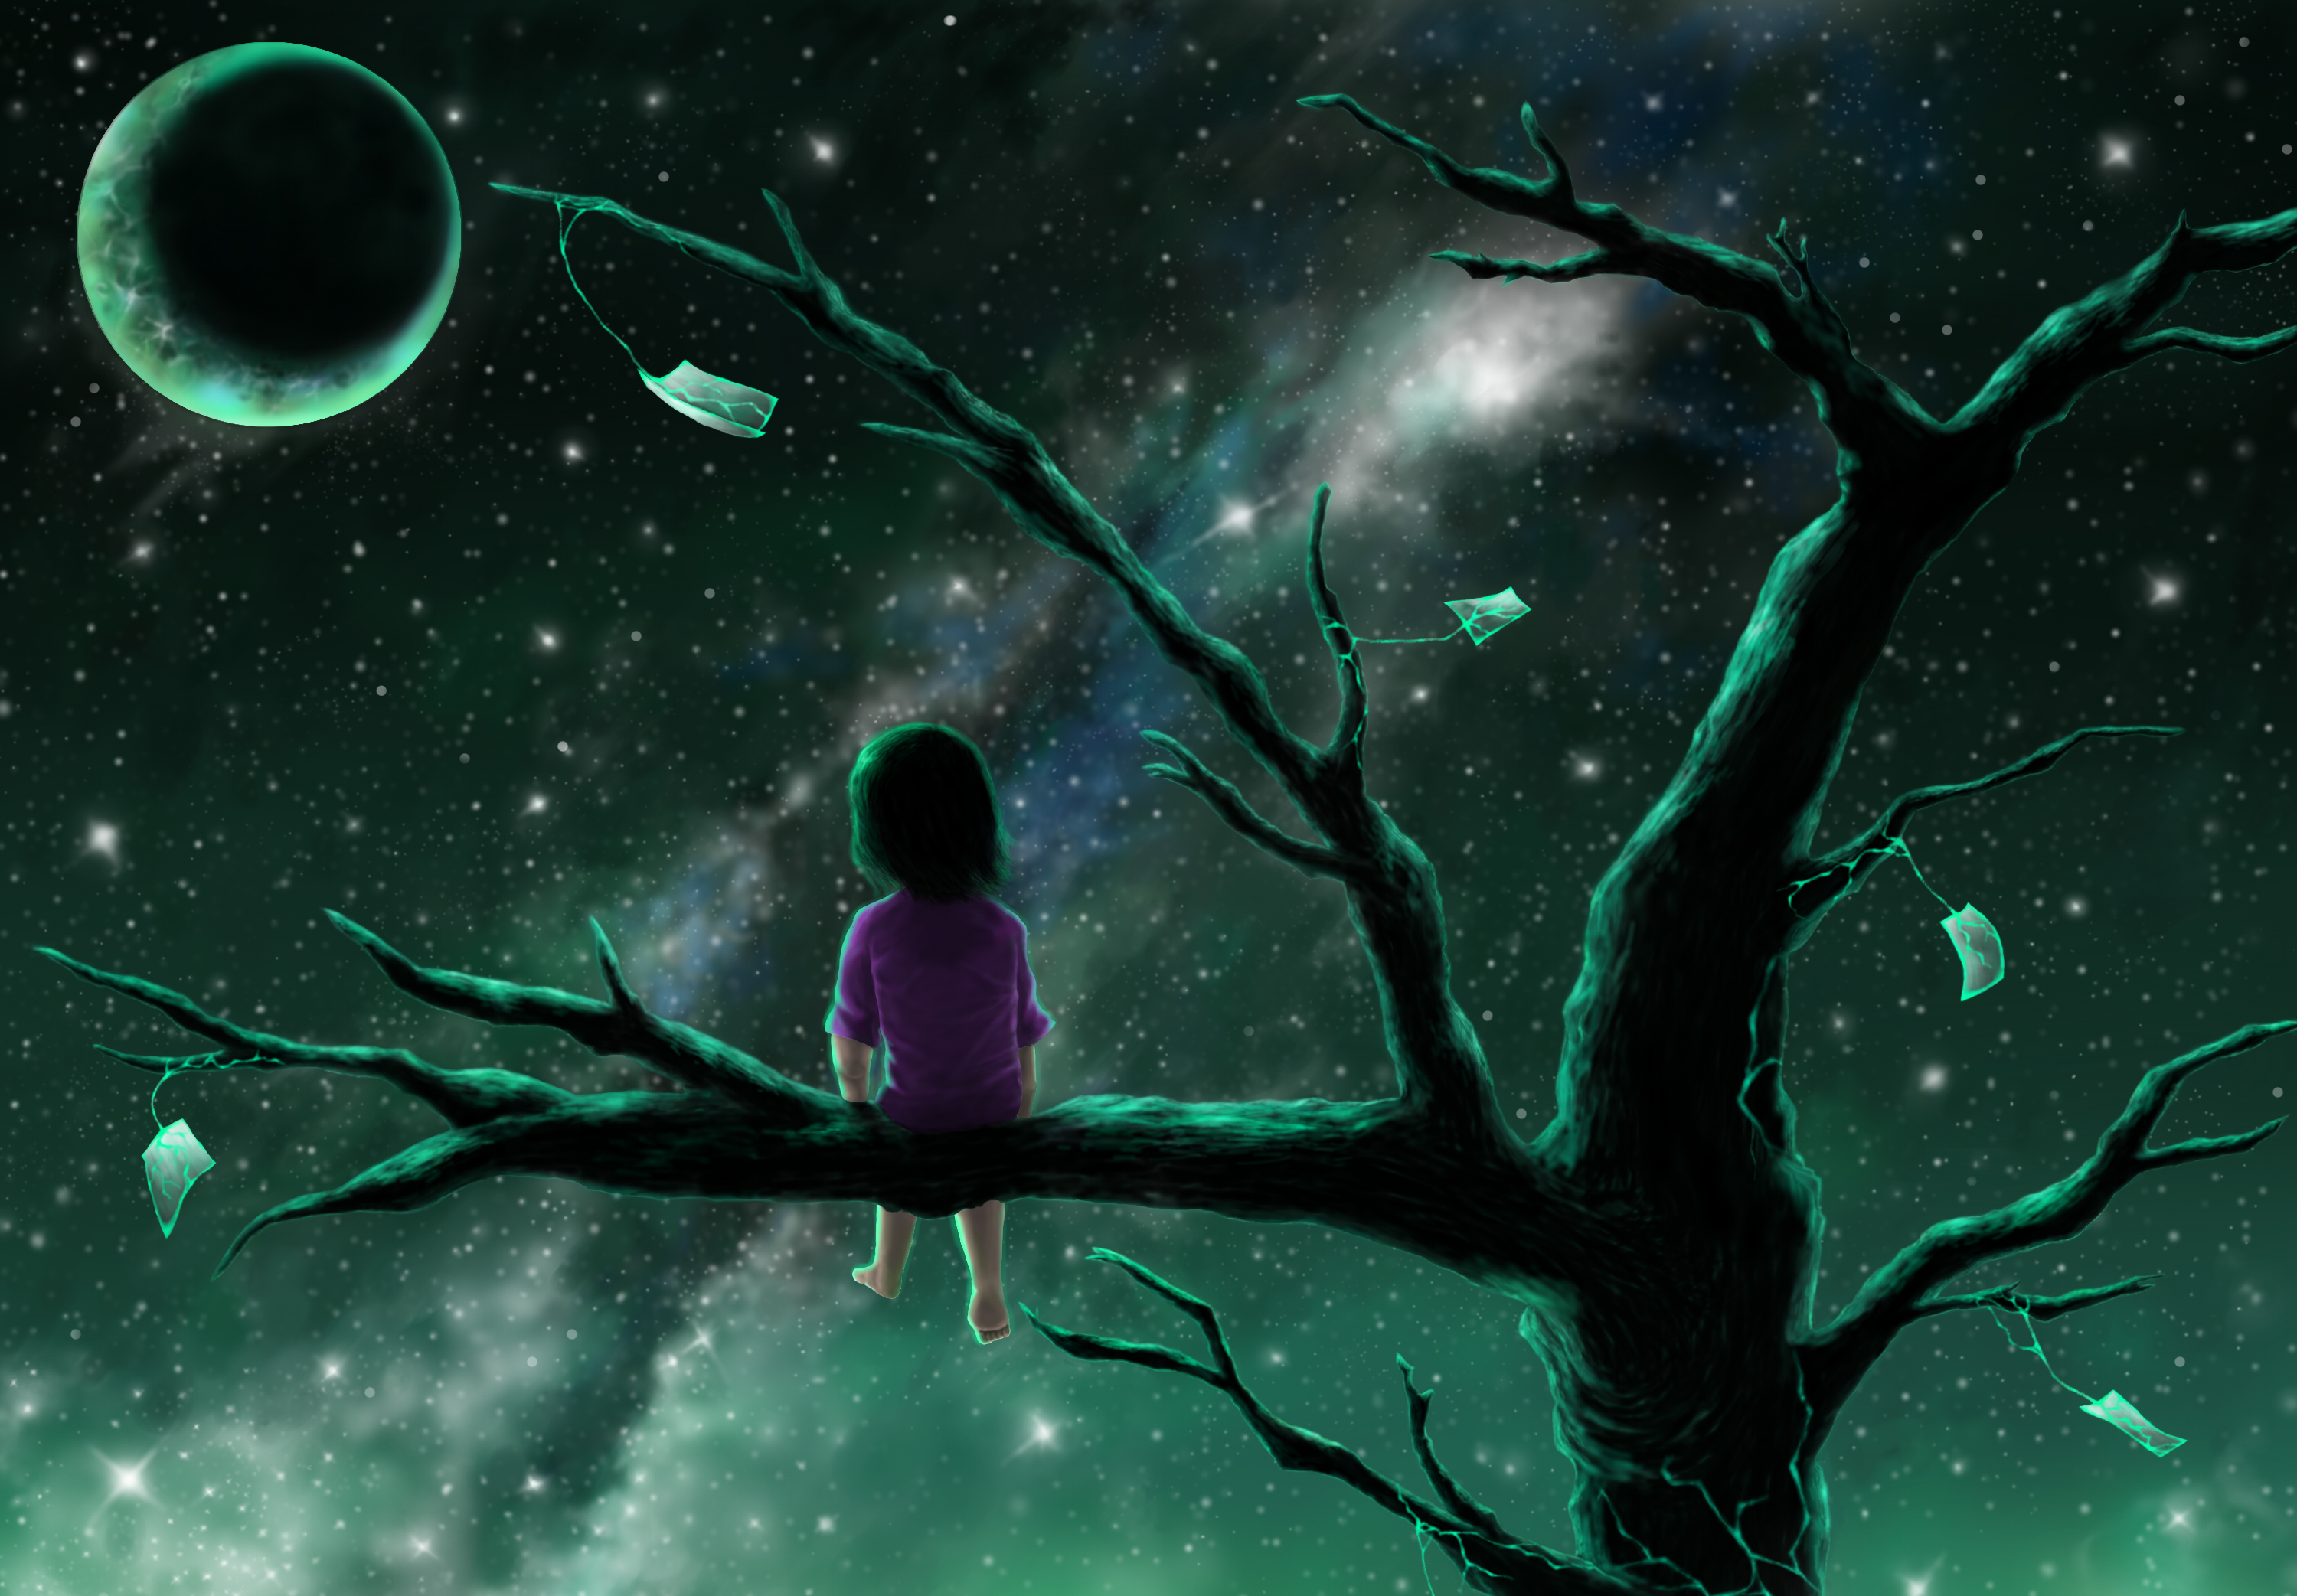 Little girl Looking at the Moon by vV-ave